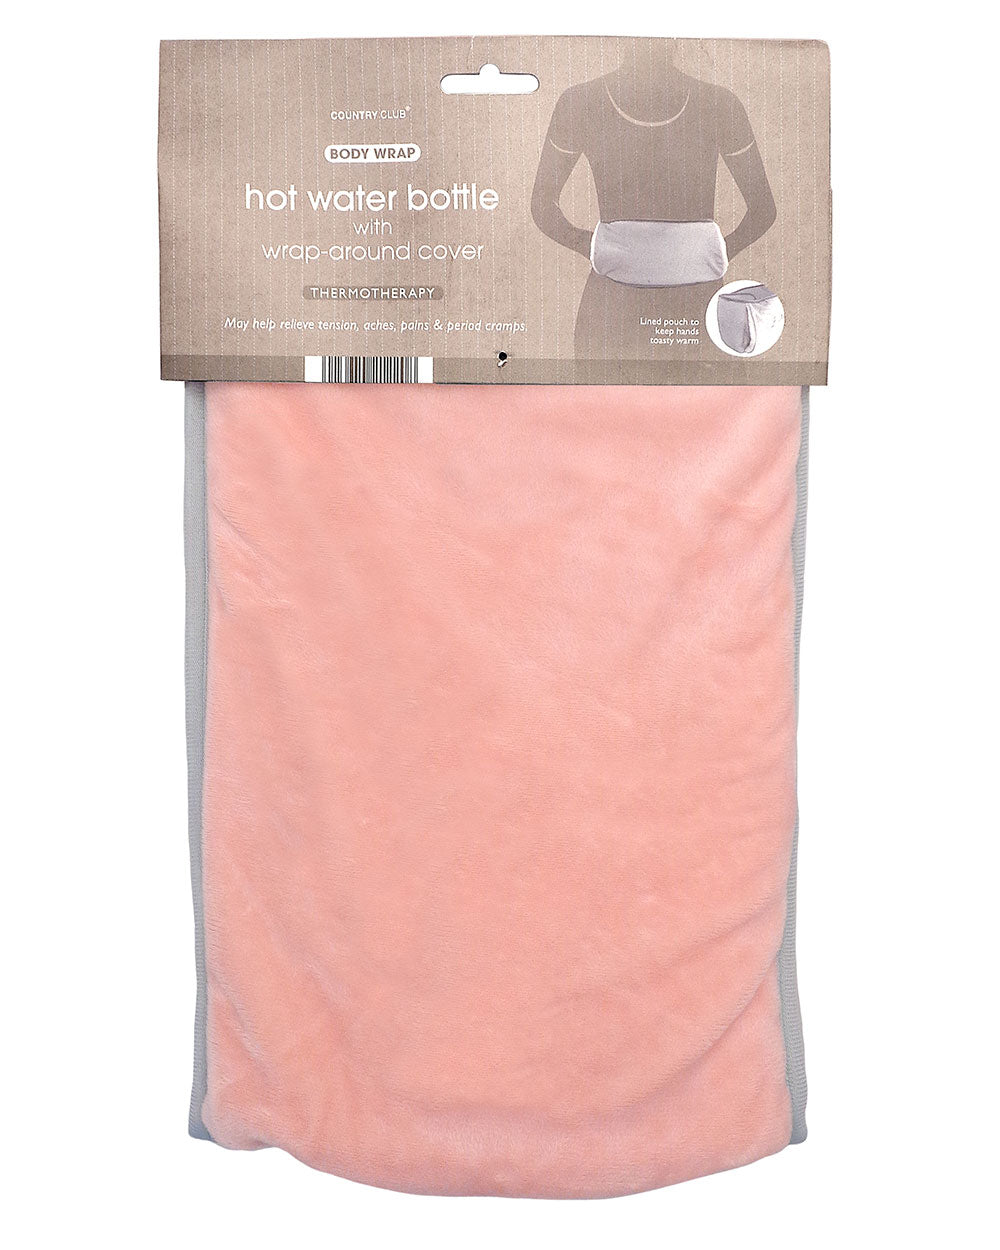 Hot Water Bottle Soft Body Wrap, Pink. Photo in packaging